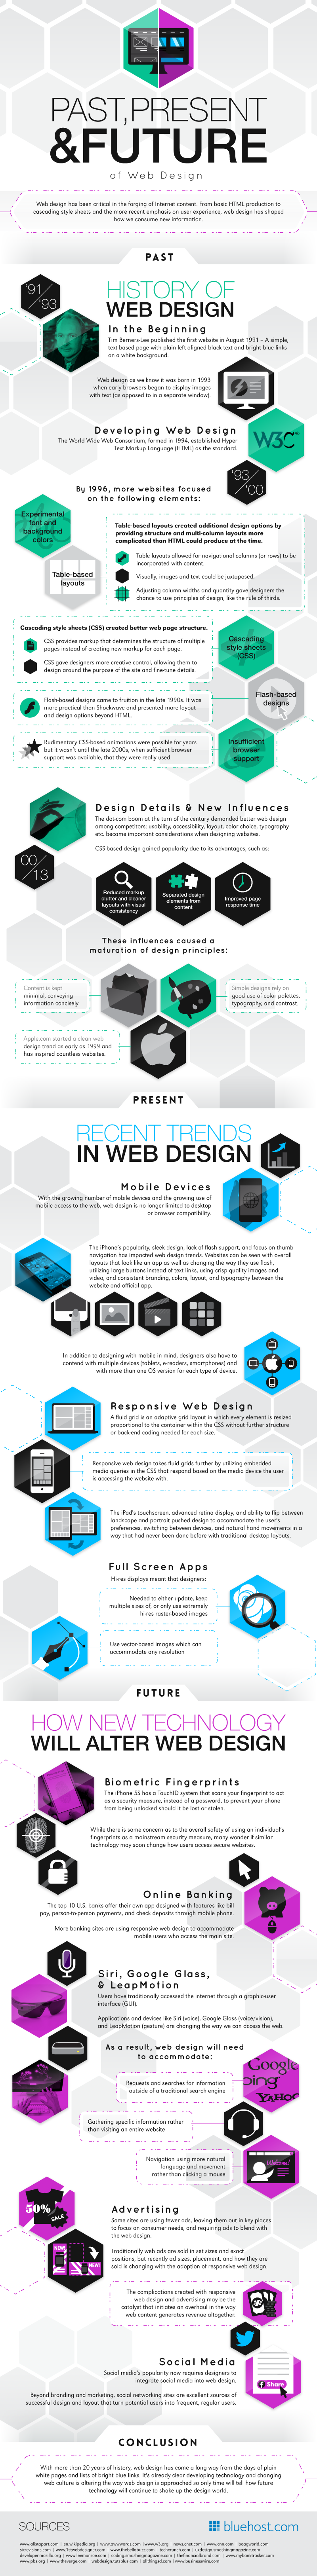 Past, Present, and Future of Web Design - #Infographic